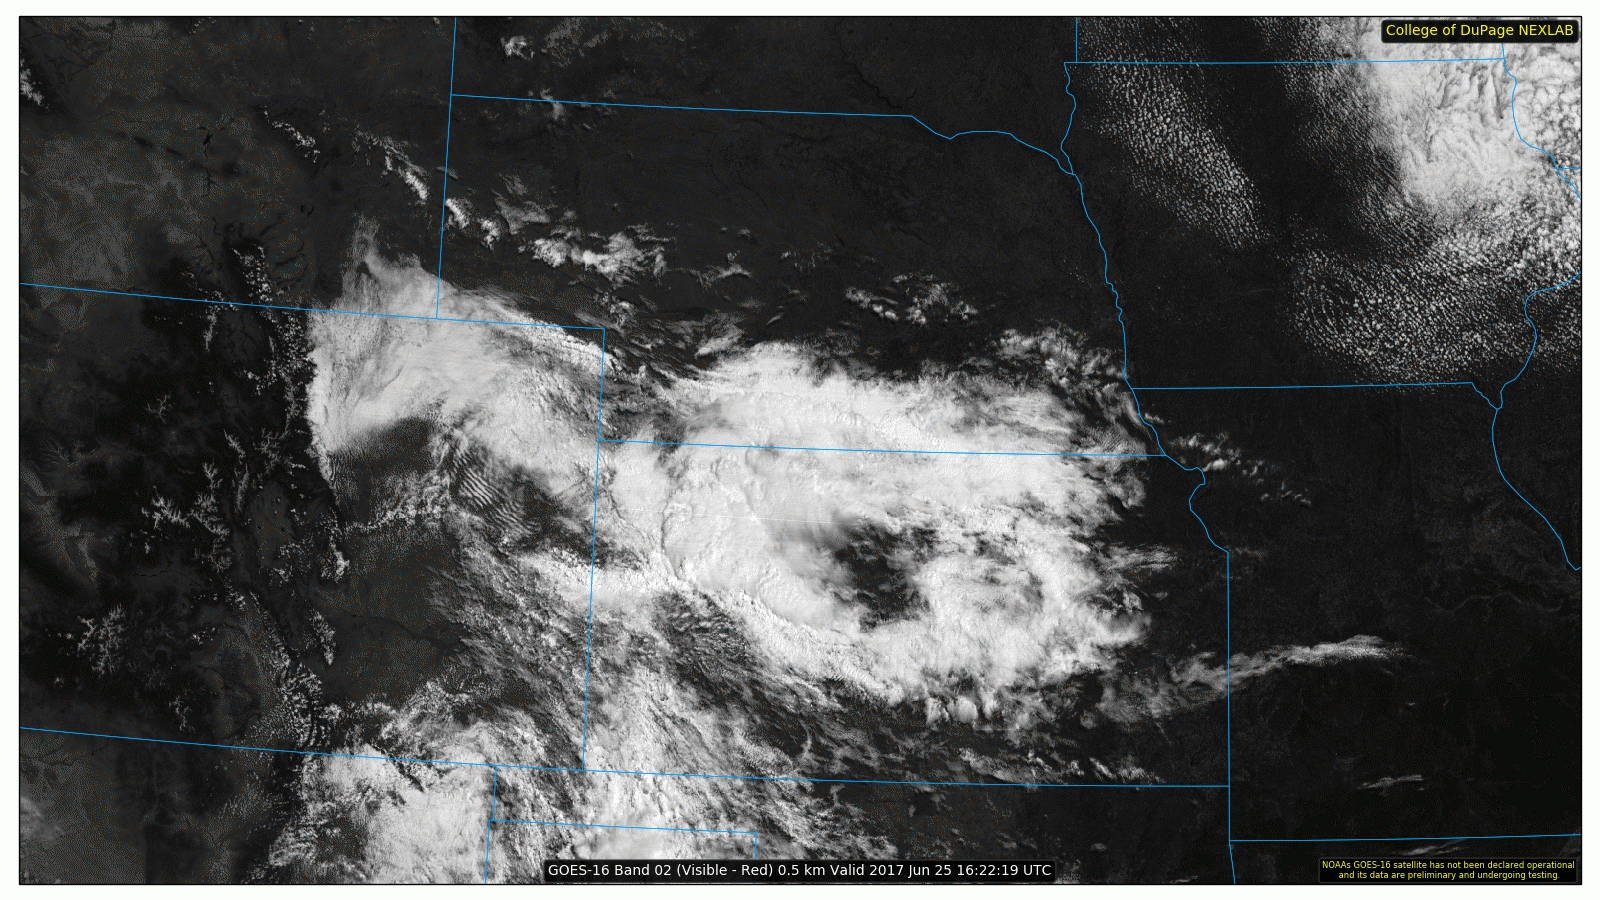 GOES-16 visible satellite|Source: College of DuPage